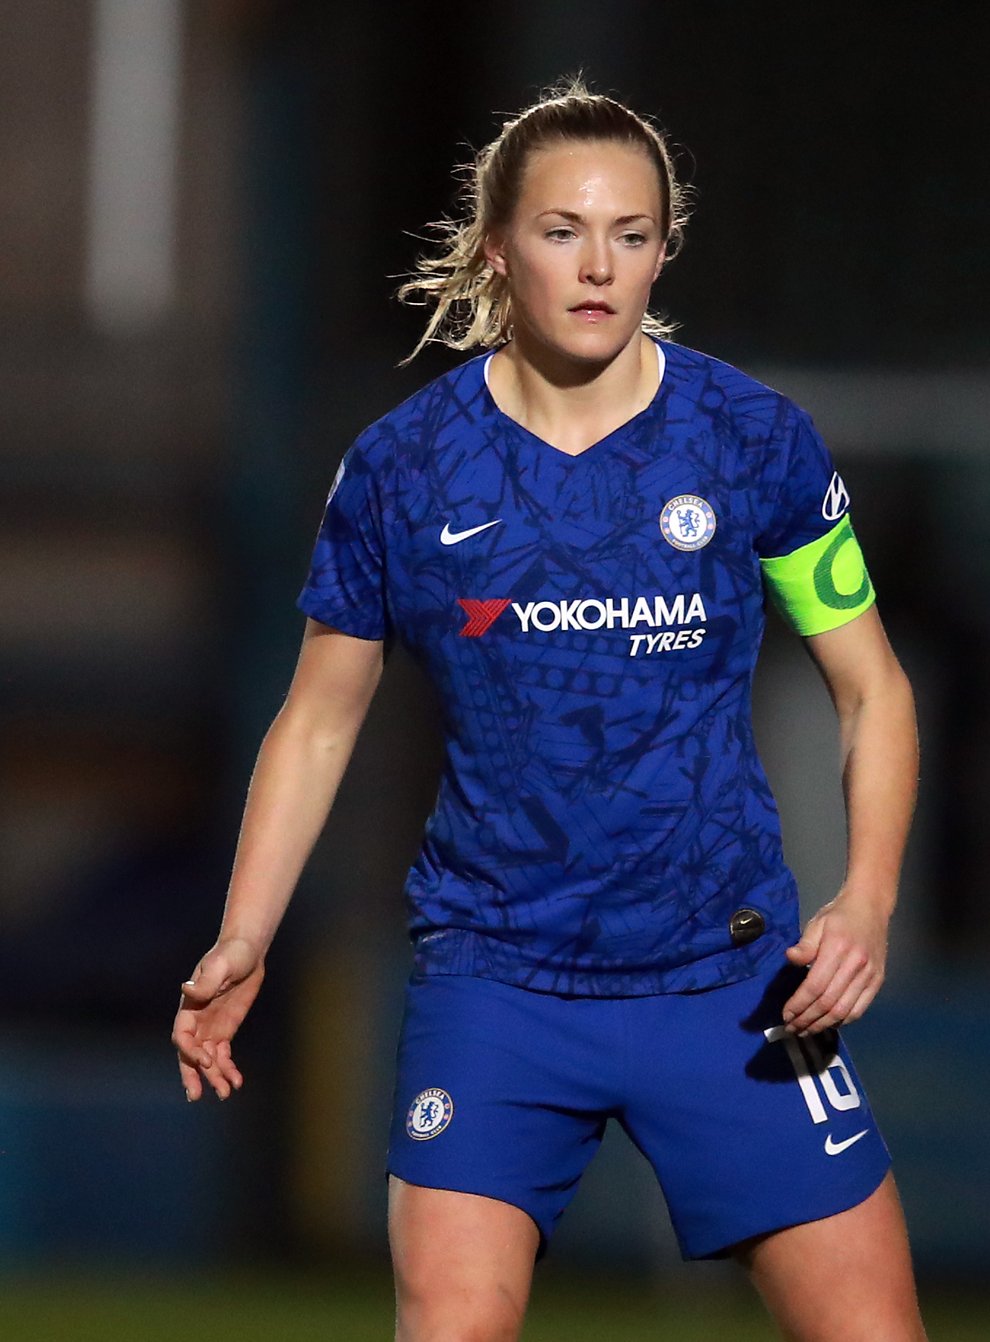 Chelsea’s Magdalena Eriksson is relishing the return of the Women's Community Shield